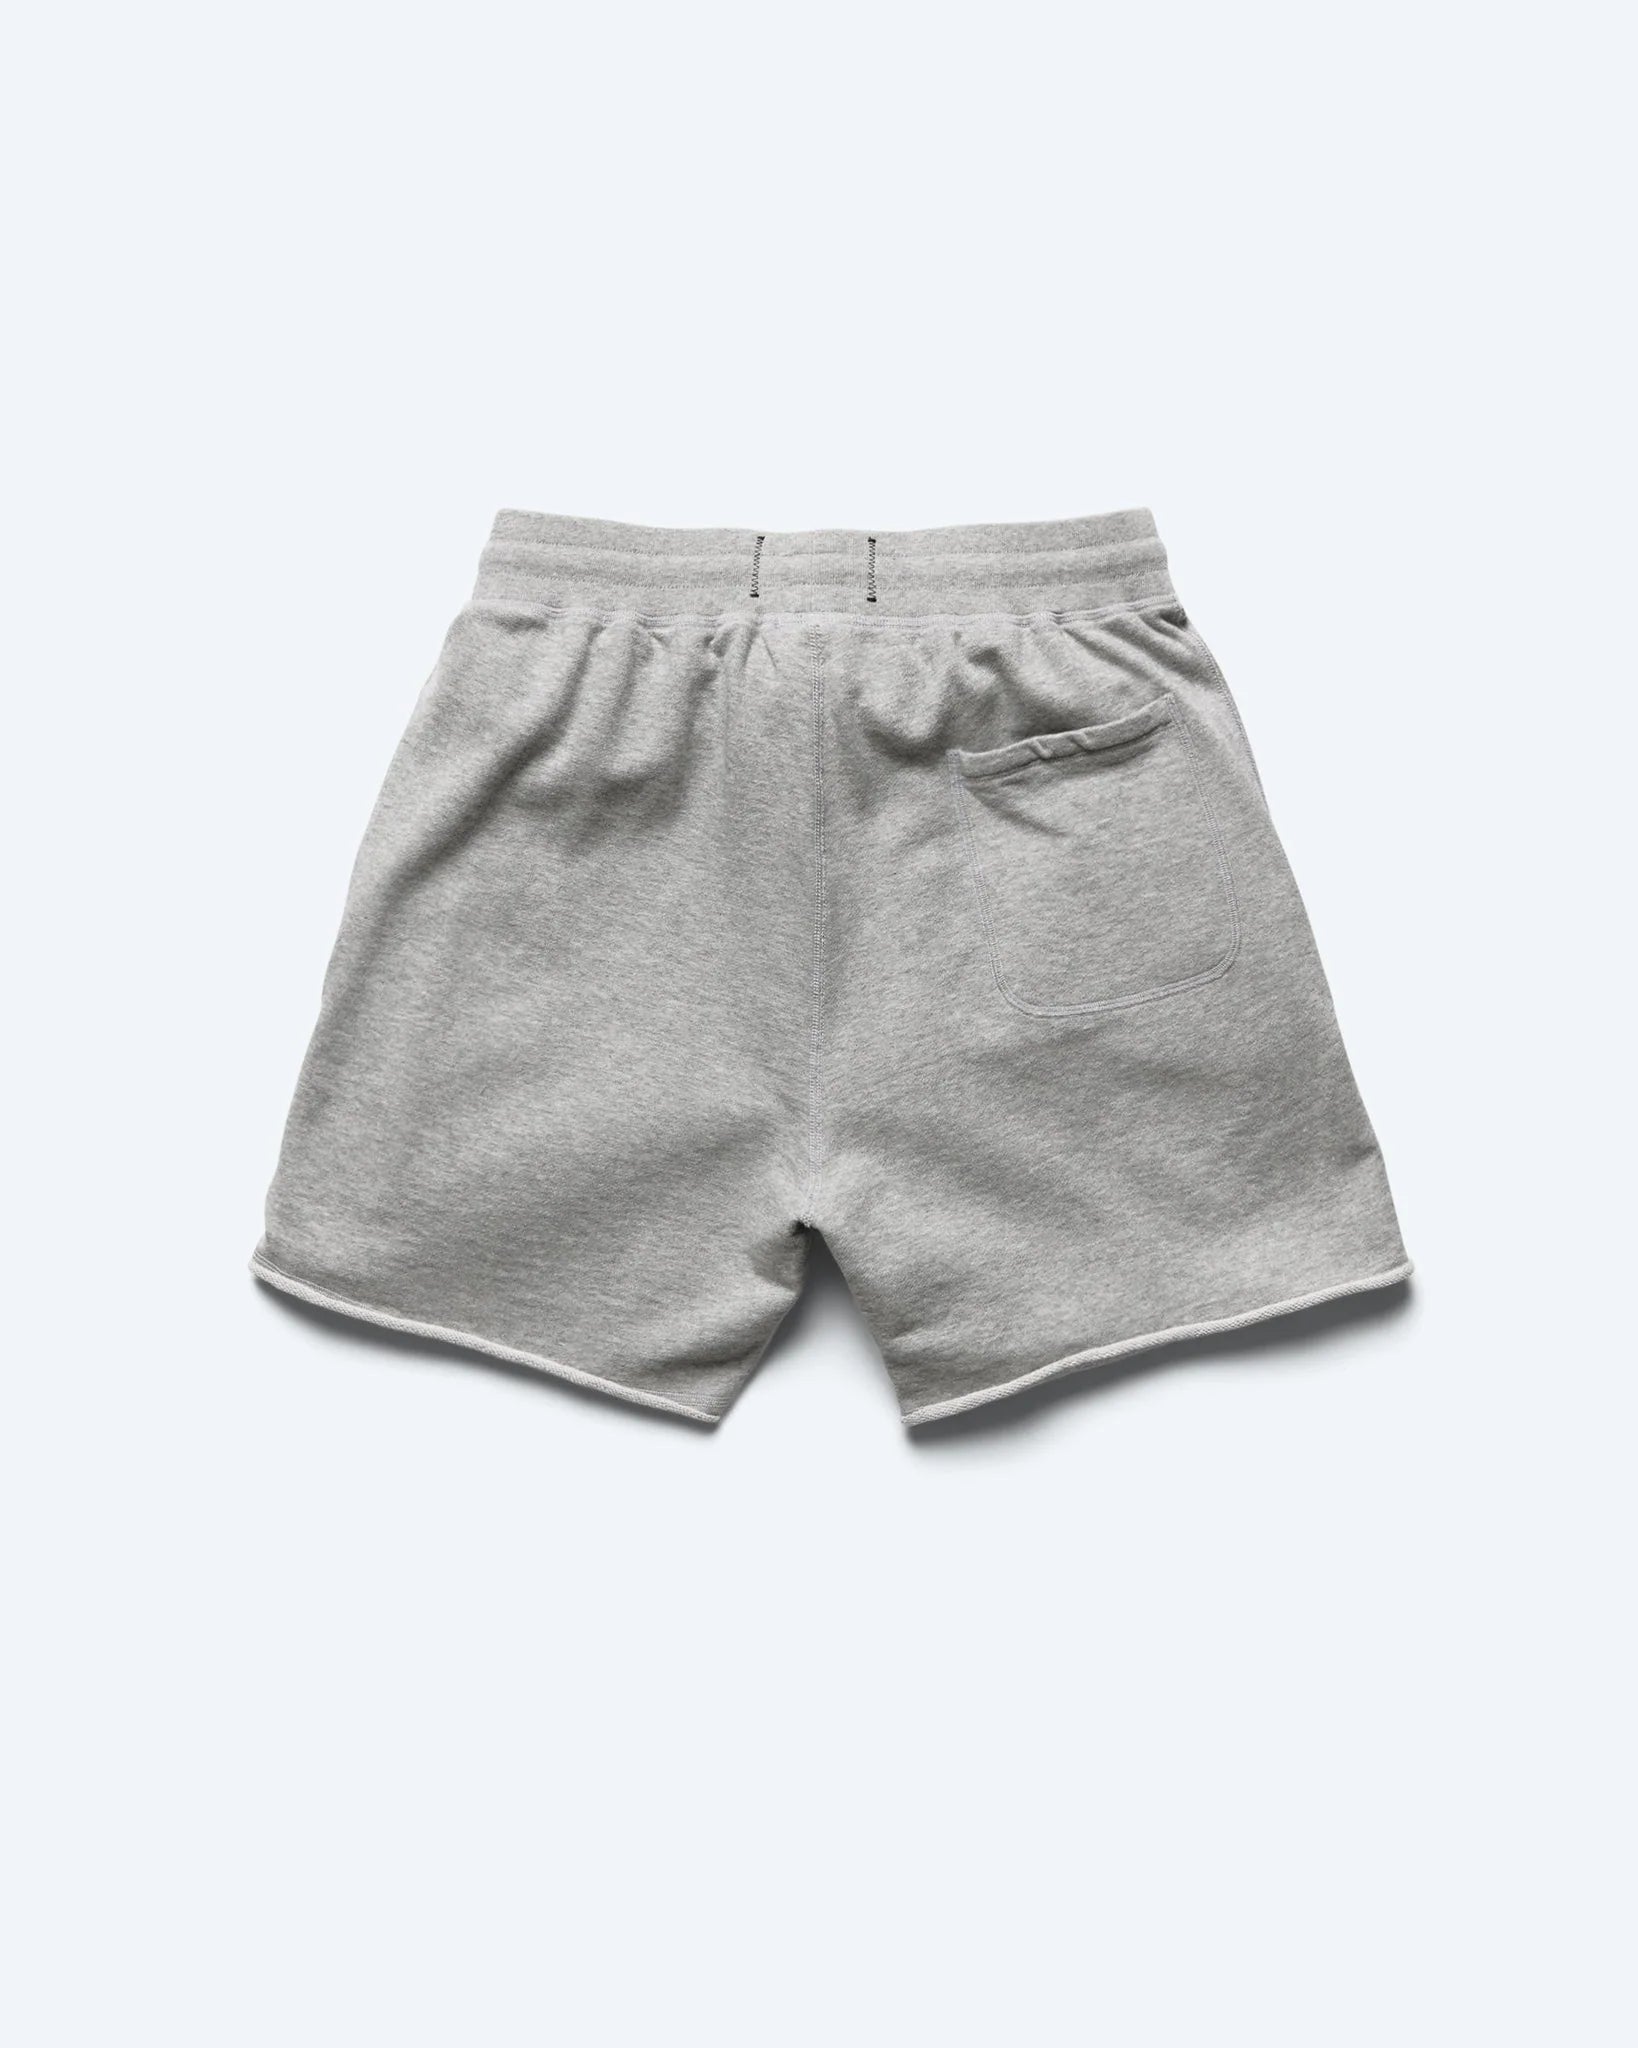 Reigning Champ Lightweight Terry Cut-Off 5.5" Short in Heather Grey